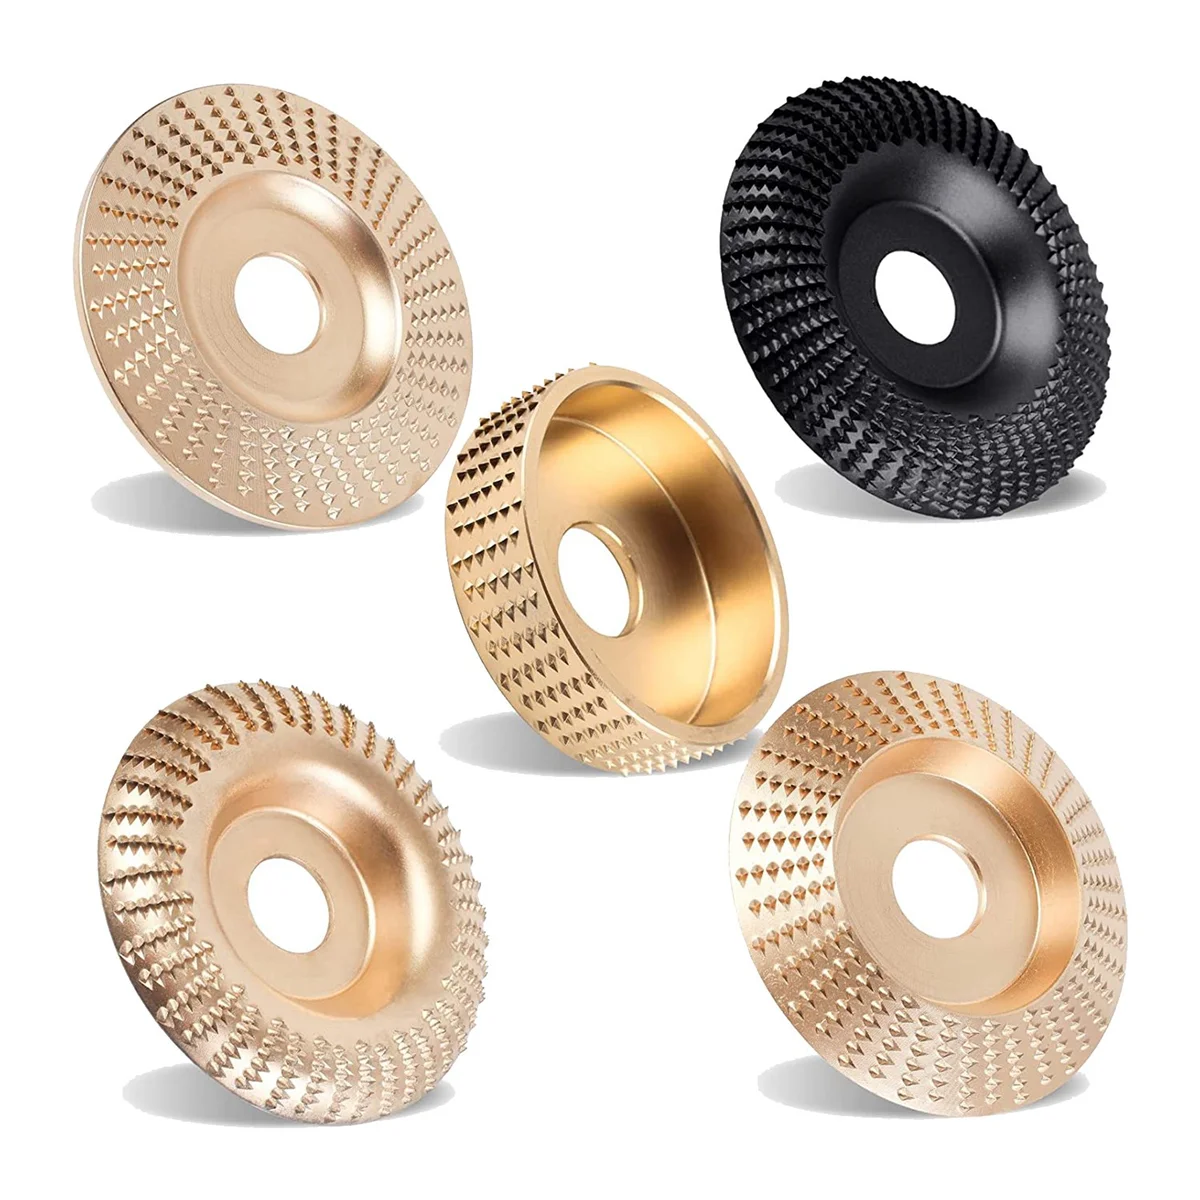 

5PCS Angle Grinder Wood Carving Disc Set, 4 and 4 1/2 Angle Grinder Attachments with 5/8 Inch Arbor, Stump Grinder Tool